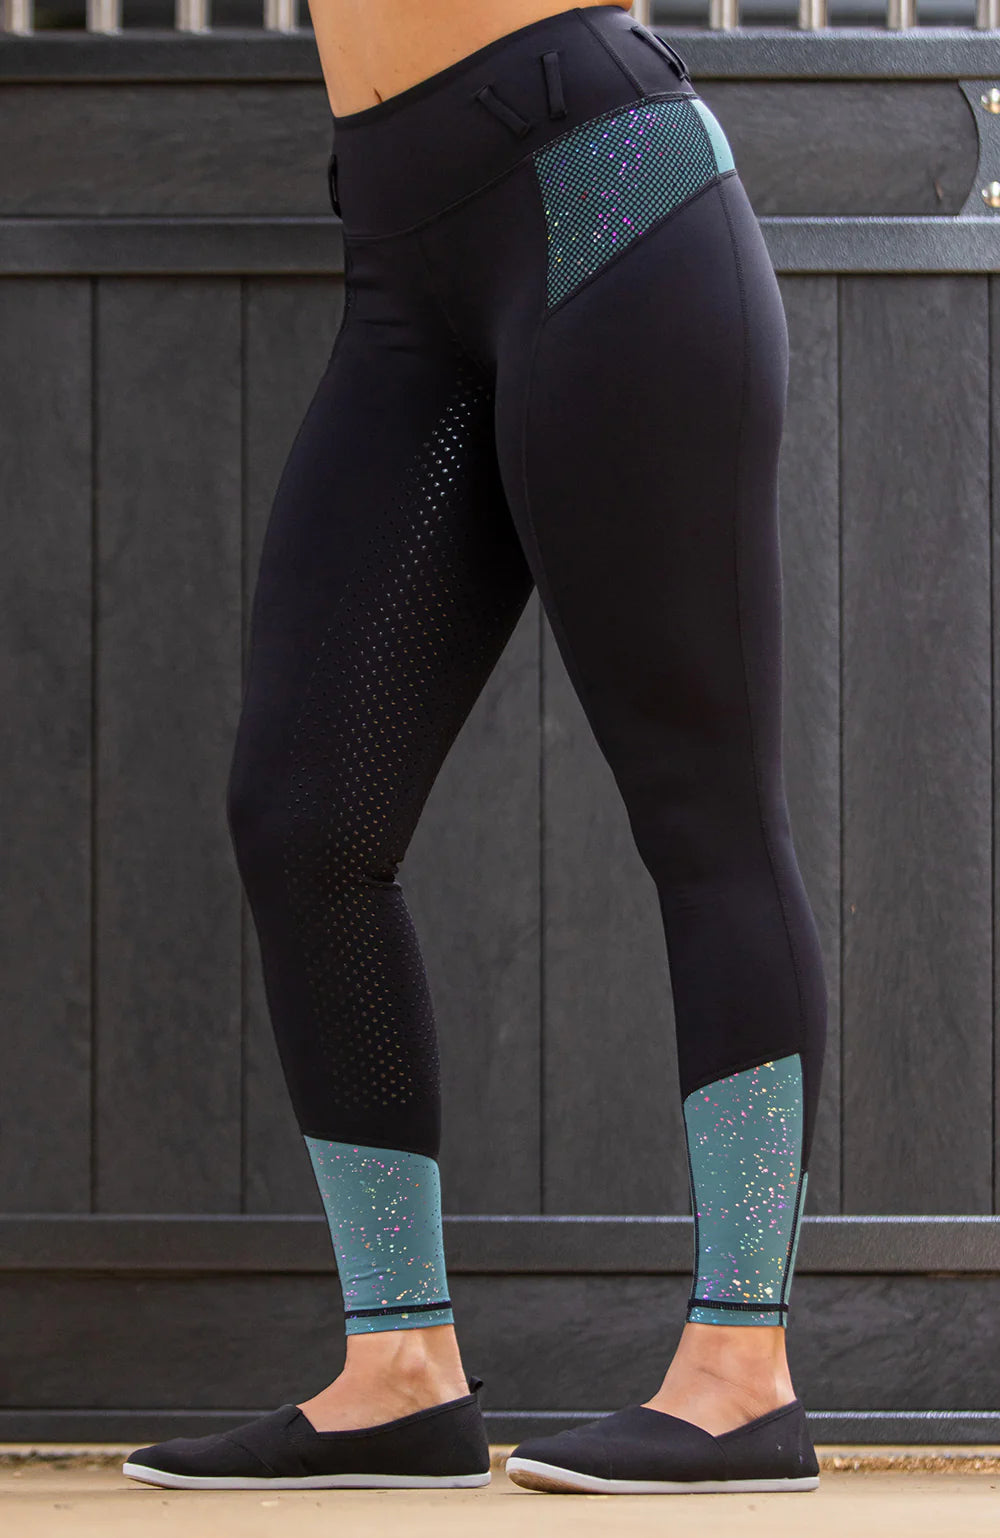 BARE Performance Riding Tights - Teal Galaxy